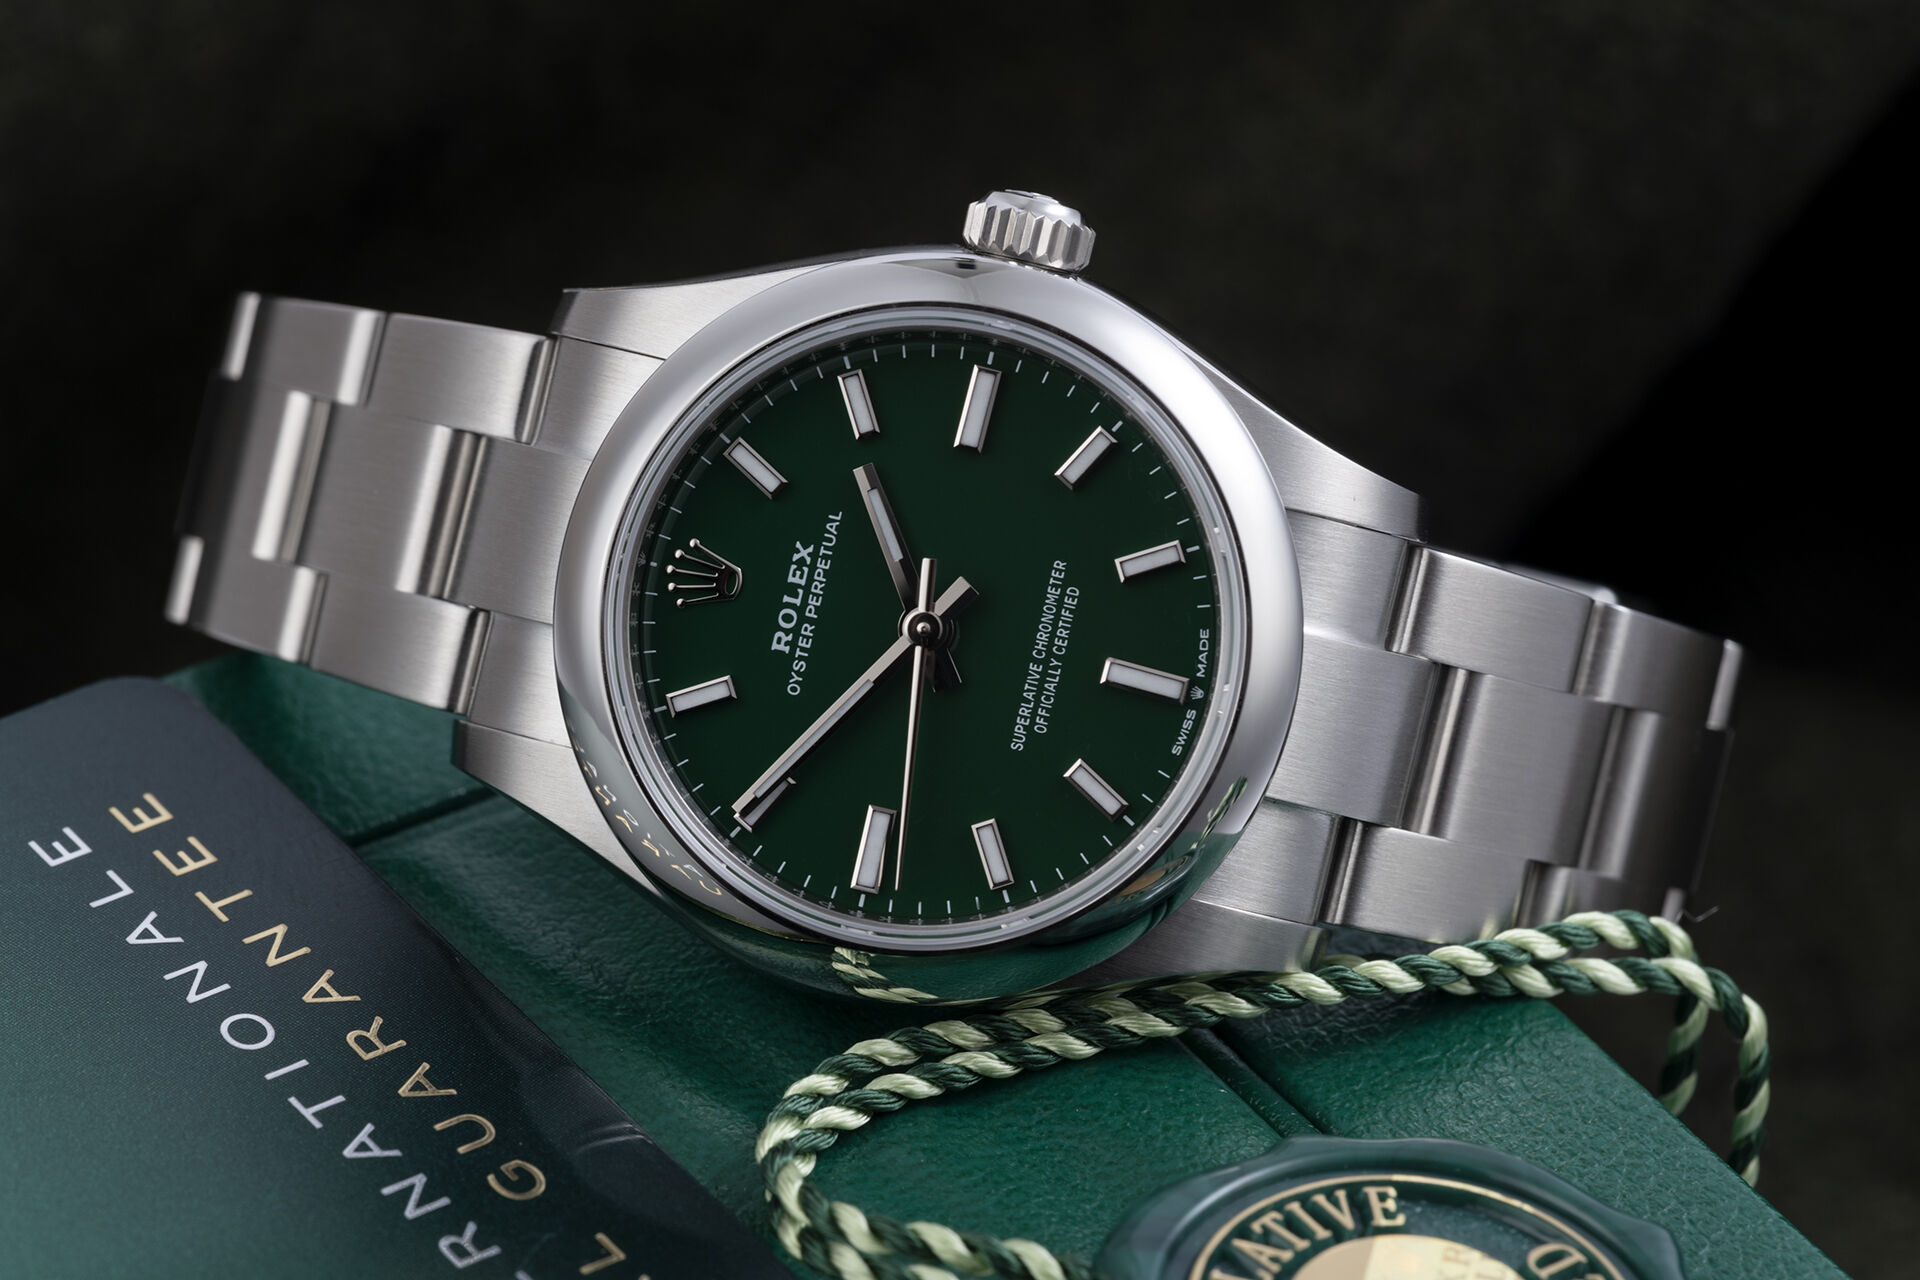 ref 277200 | Latest Release - Green Dial | Rolex Oyster Perpetual